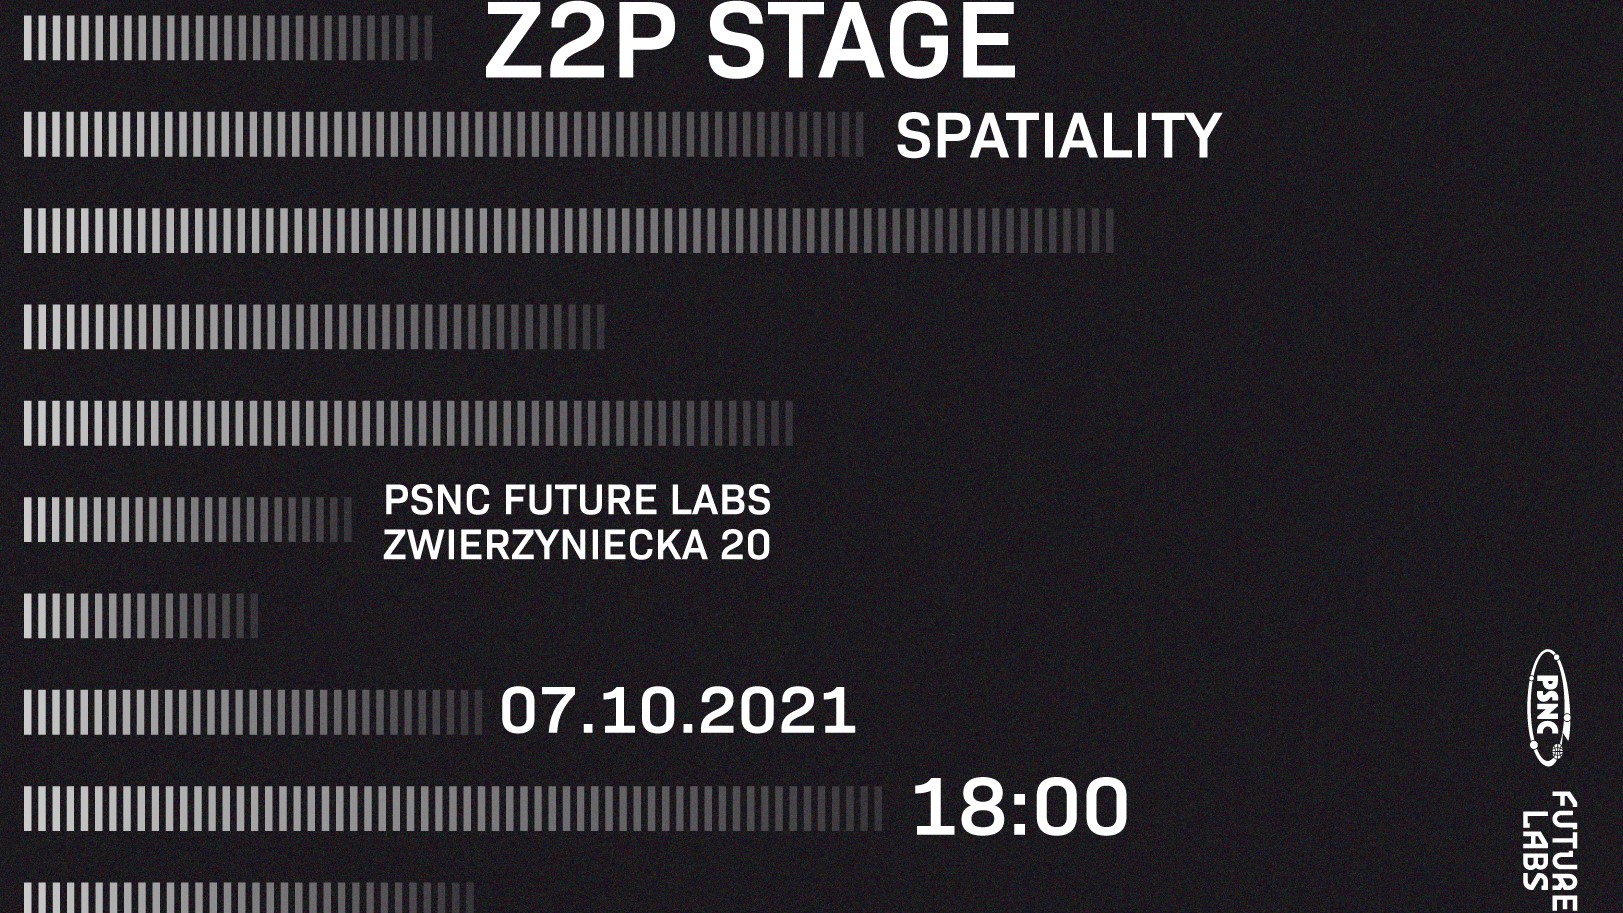 Third edition of Z2P Stage at PSNC Future Labs